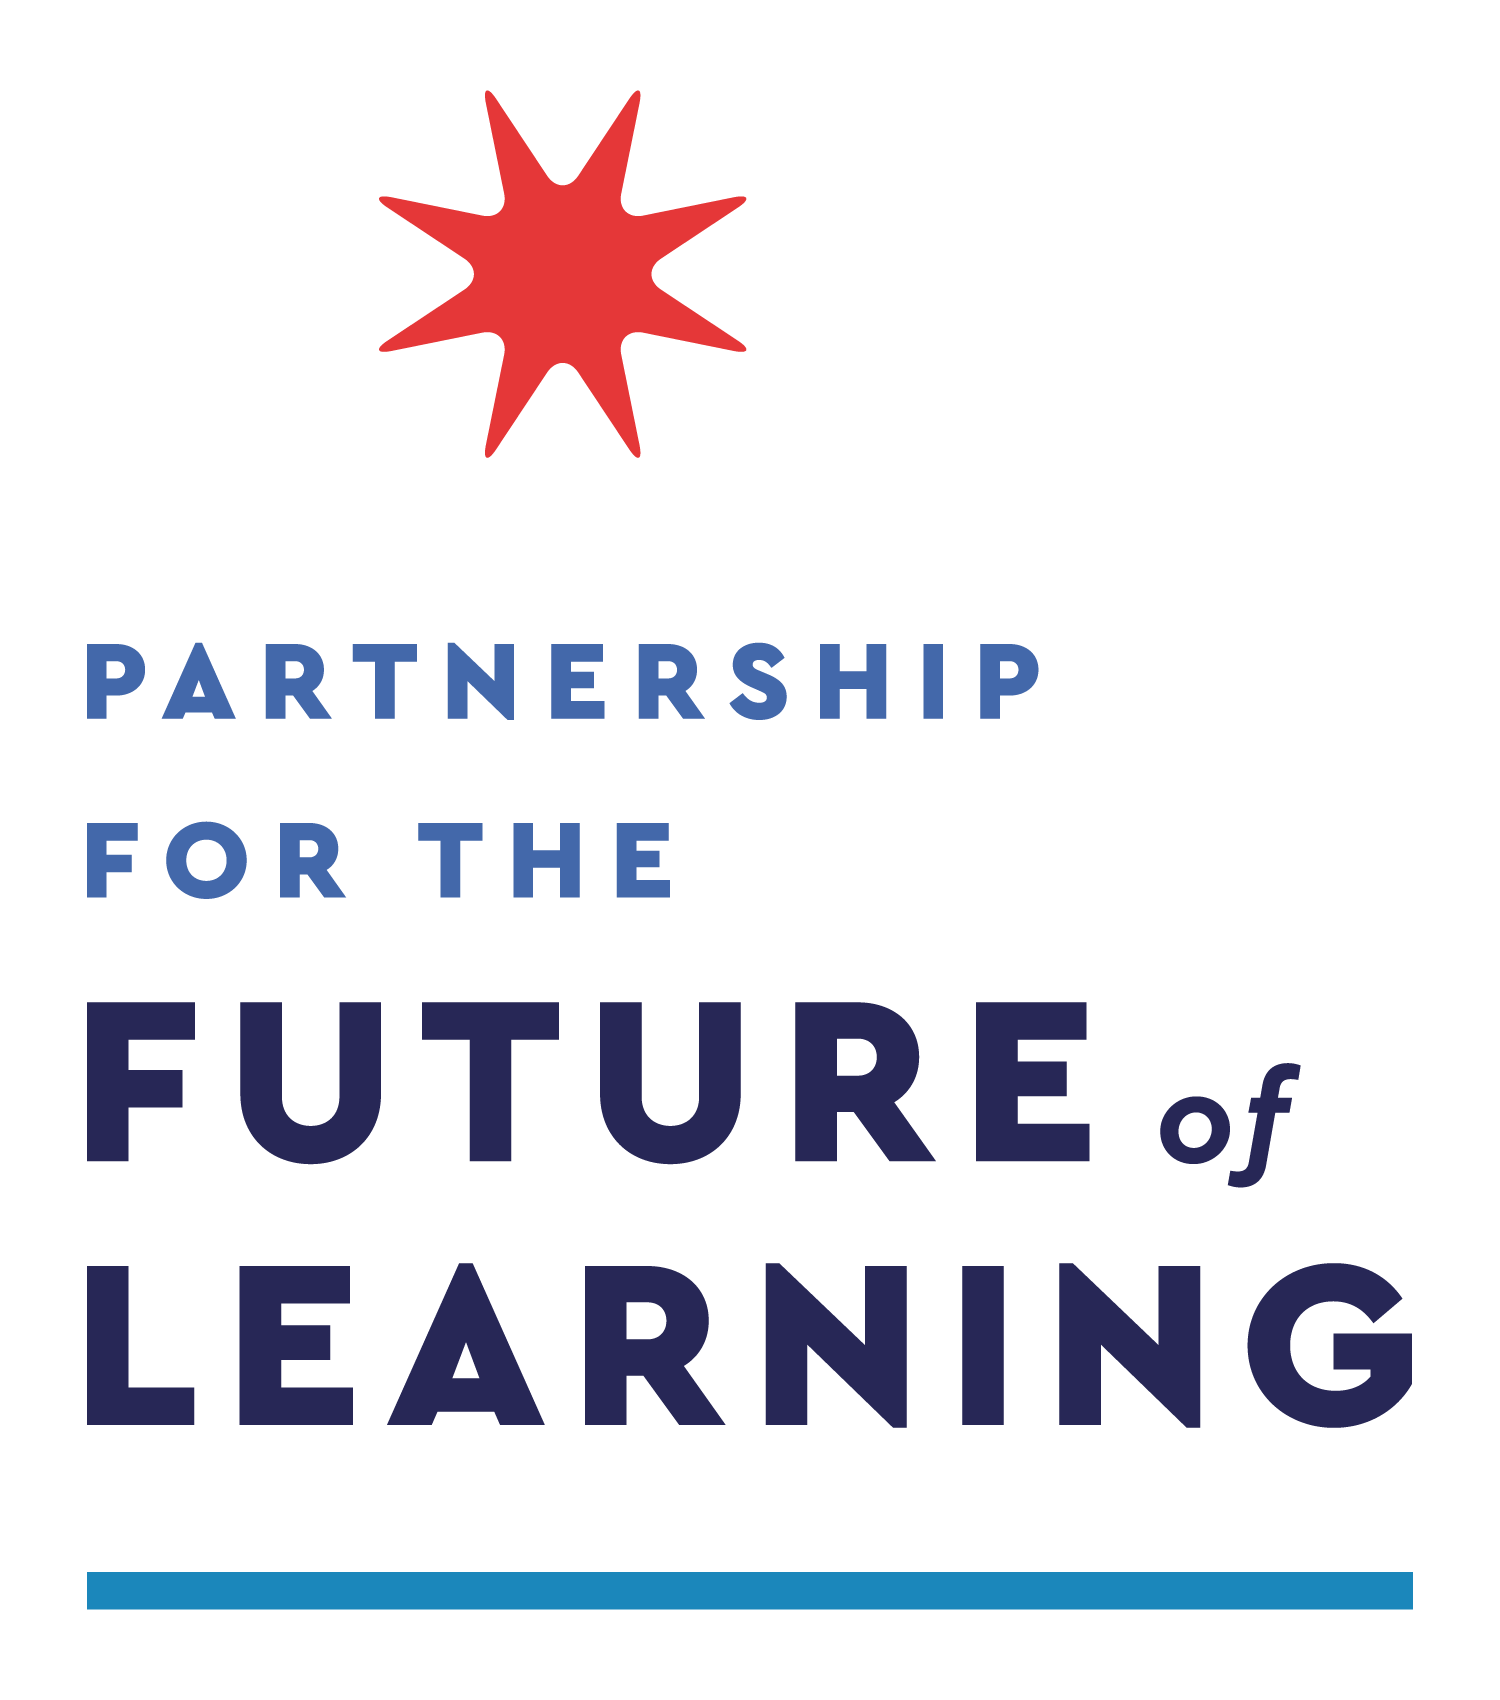 The logo of the Partnership for the Future of Learning